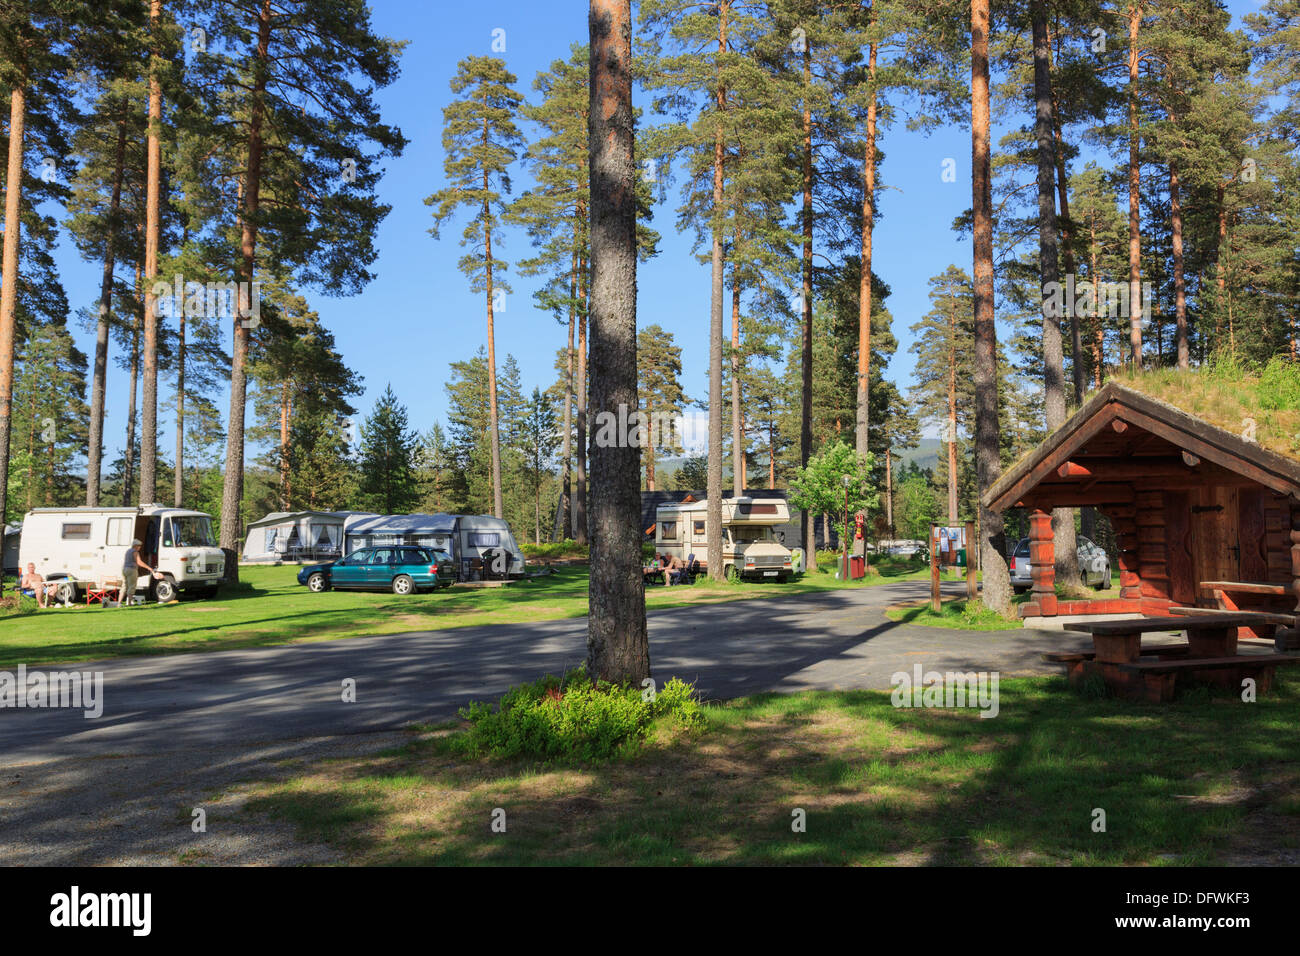 Campers camping on a woodland campsite at Hornnes, Evje, East Agder, Norway, Scandinavia, Europe Stock Photo